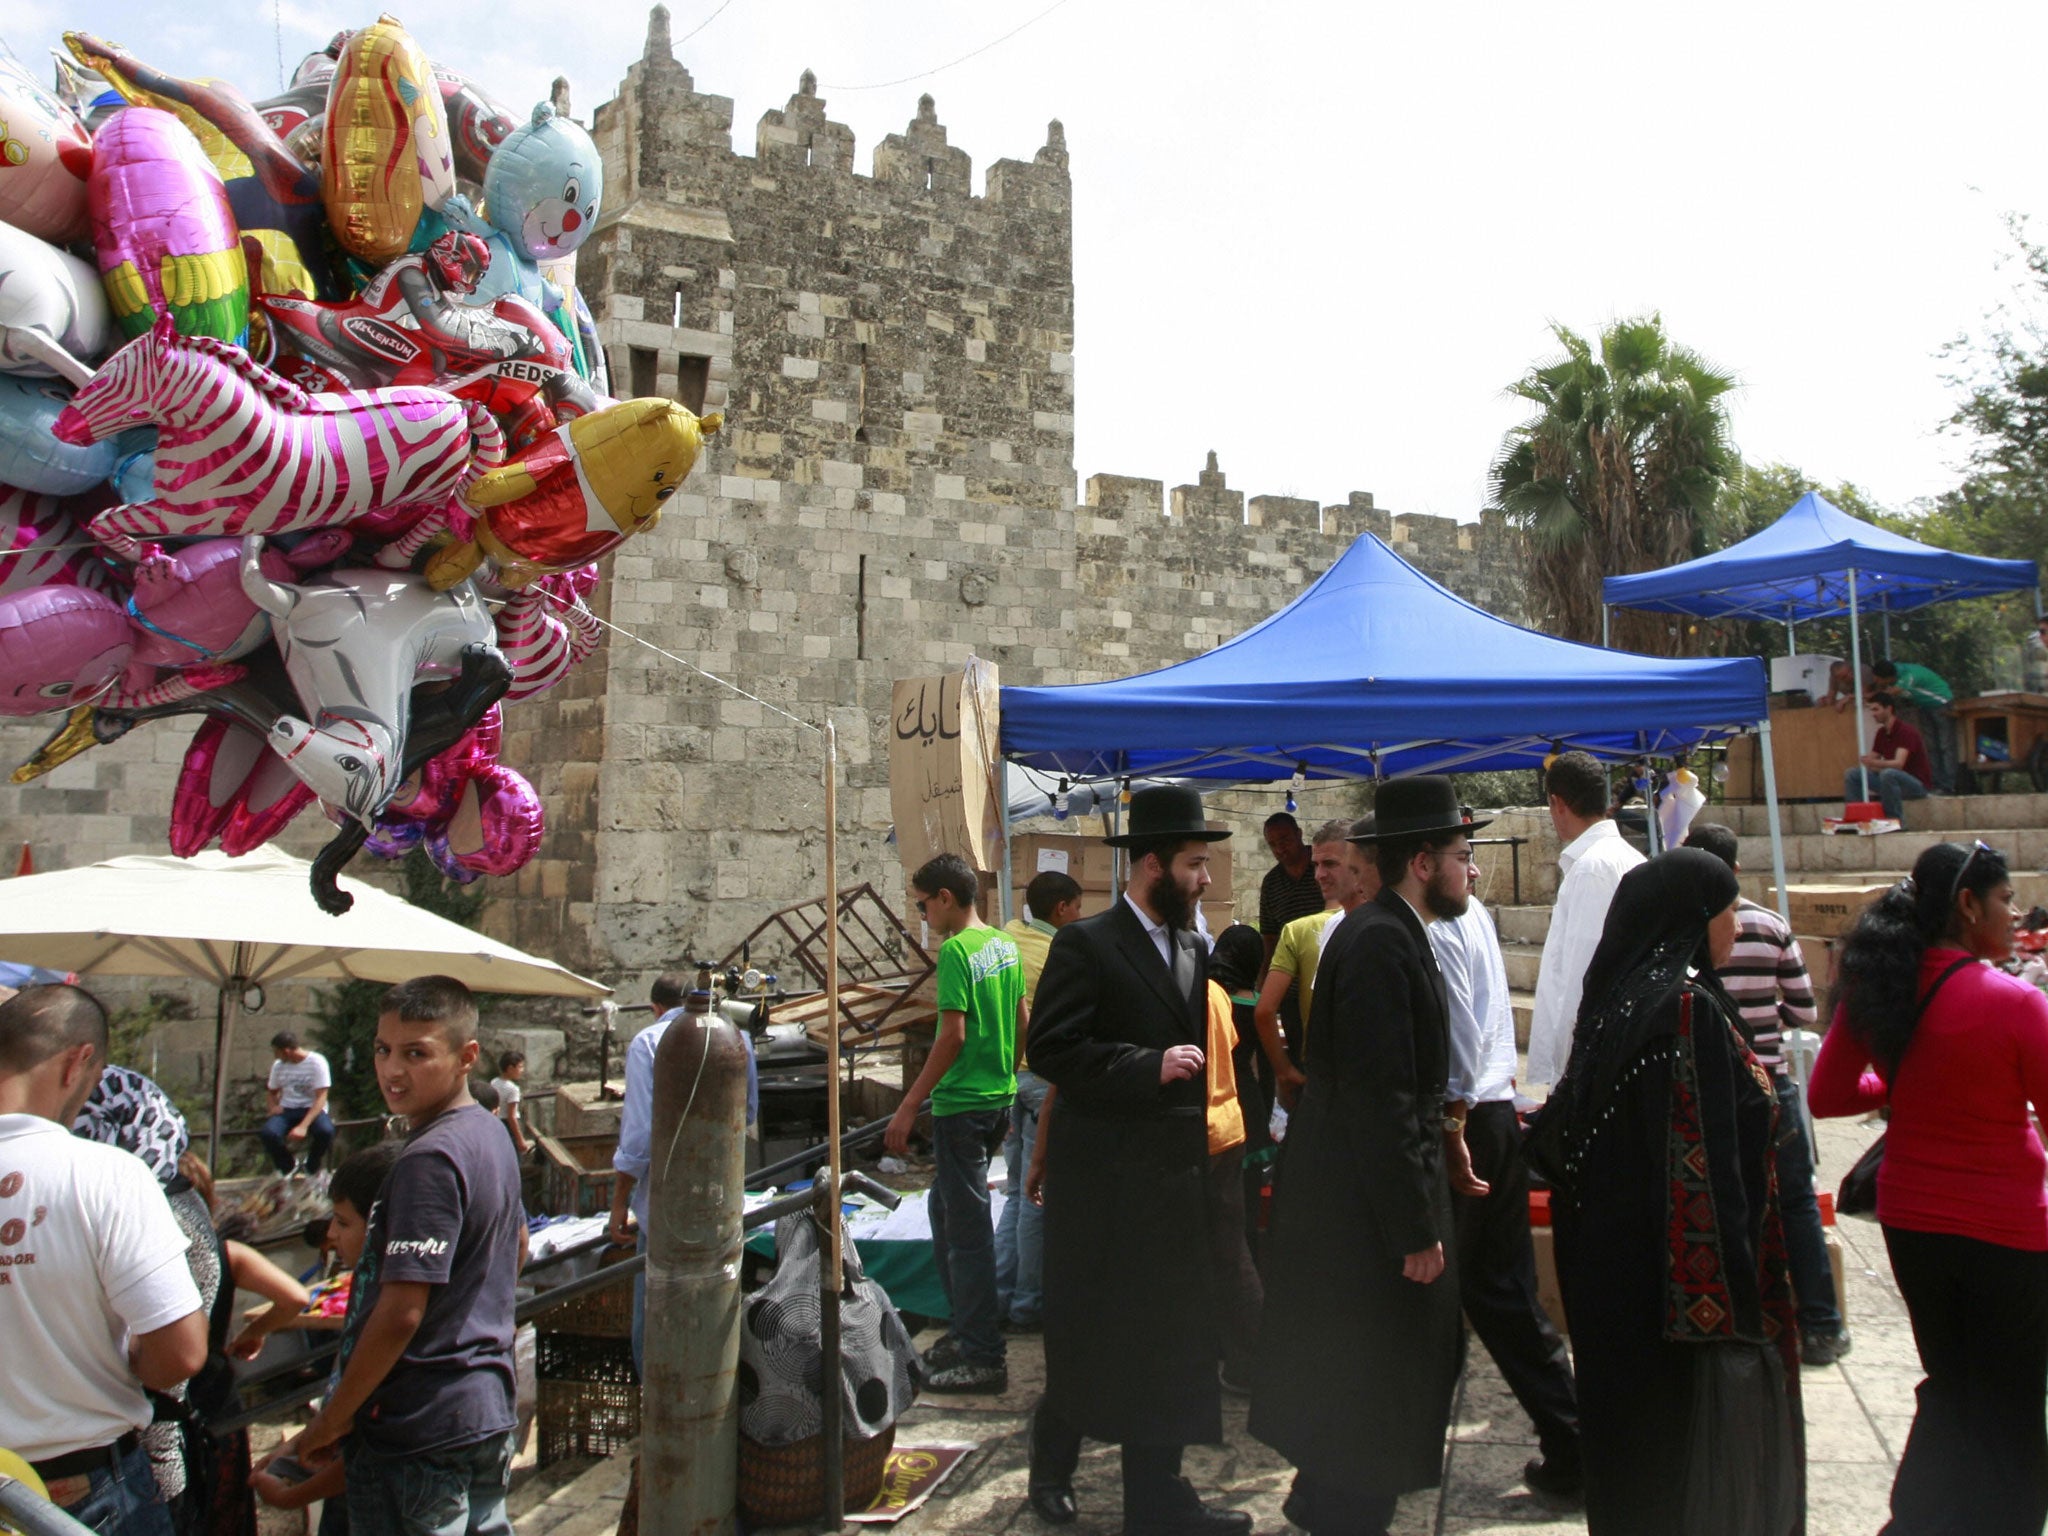 City of hope: Orthodox Jews and Muslims mingle at Damascus Gate in Jerusalem